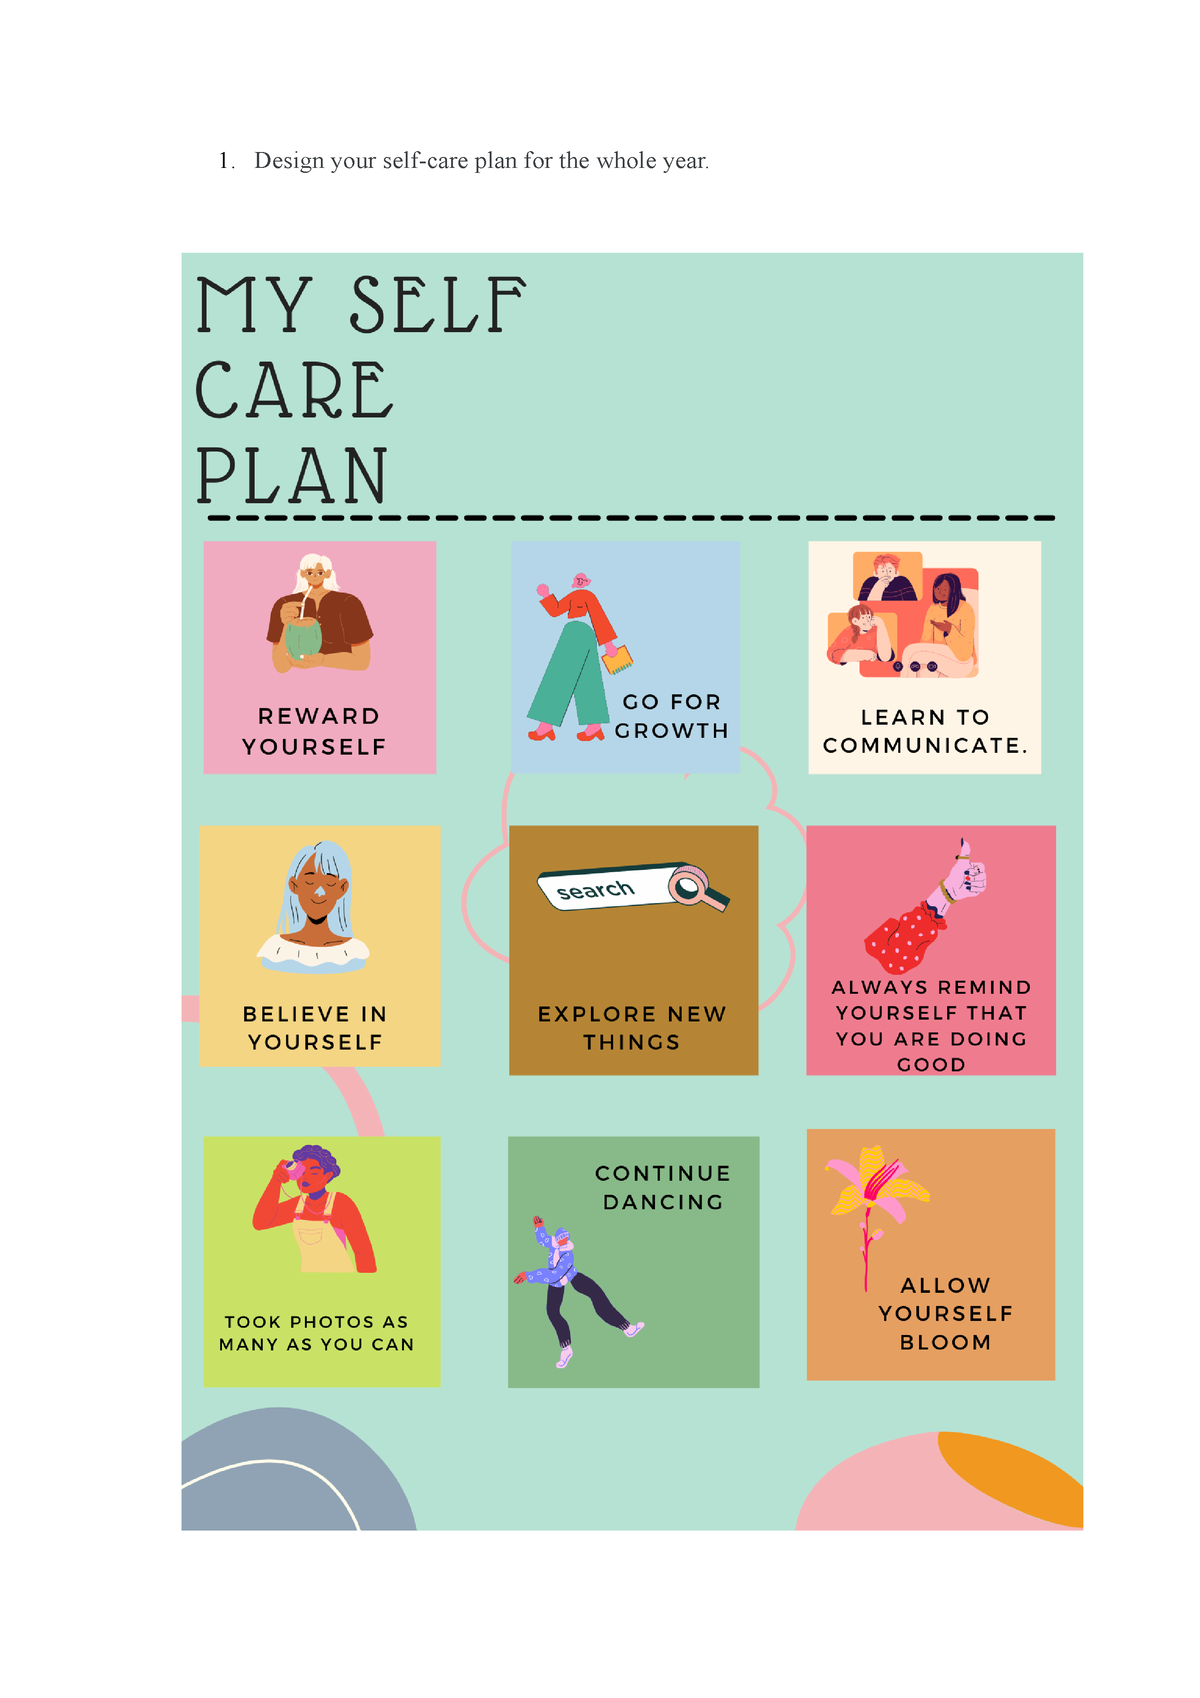 assignment-11-care-for-yourself-design-your-self-care-plan-for-the